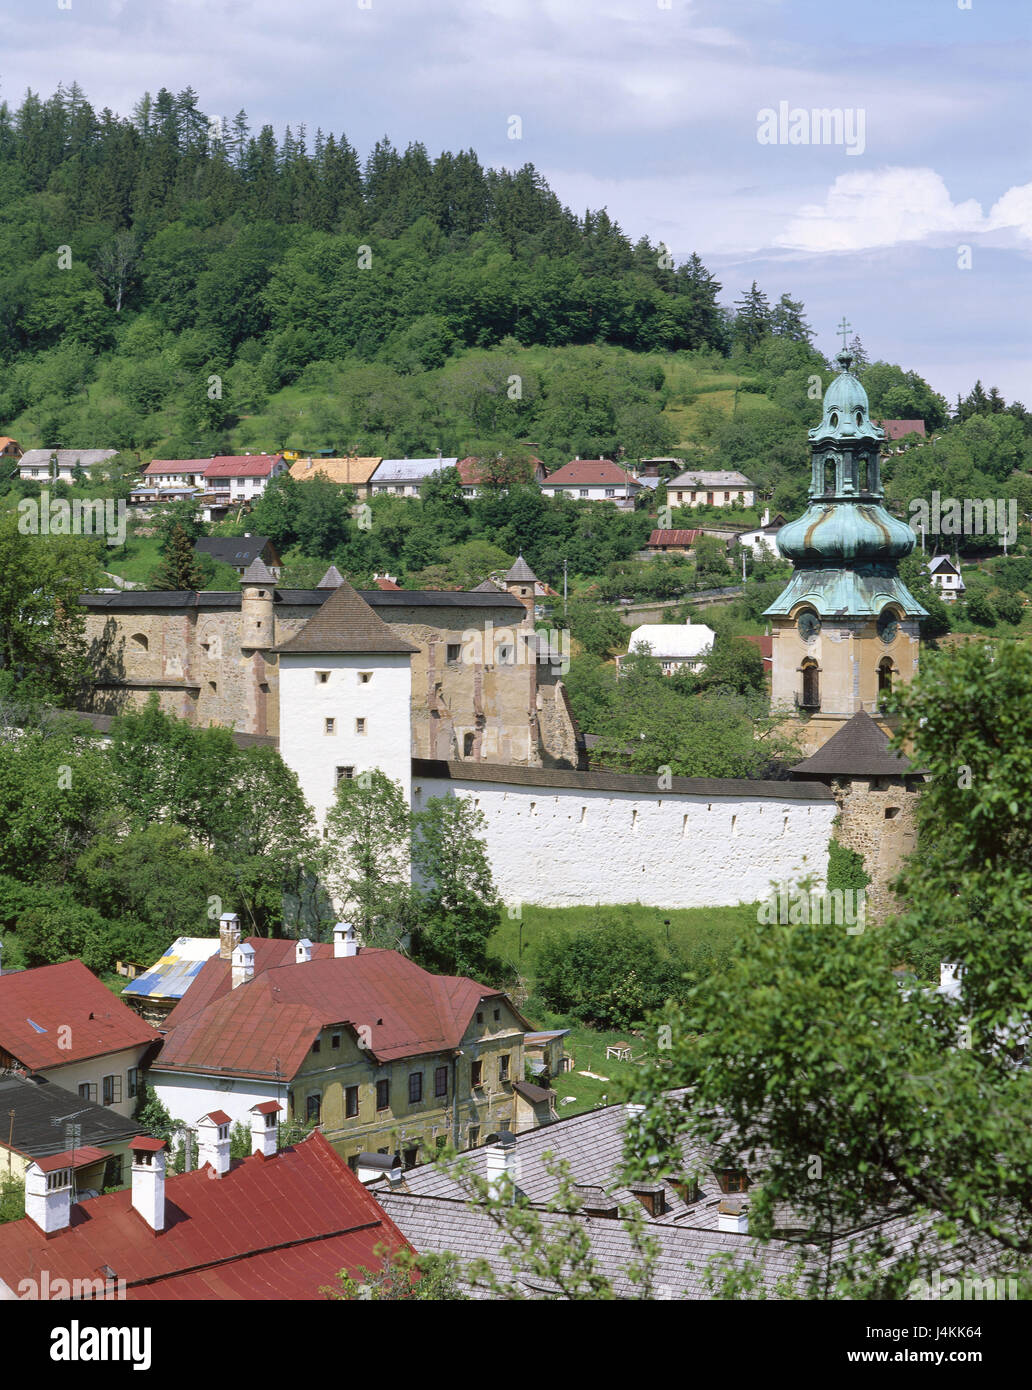 Slovakia, Banska Stiavnica, town view, old castle 'Stary zamok' Europe, the Slovakian republic, the Slovak Erzgebirge, Schemnitz, town, mining town, lock, building, structure, architecture, place of interest, UNESCO-world cultural heritage Stock Photo